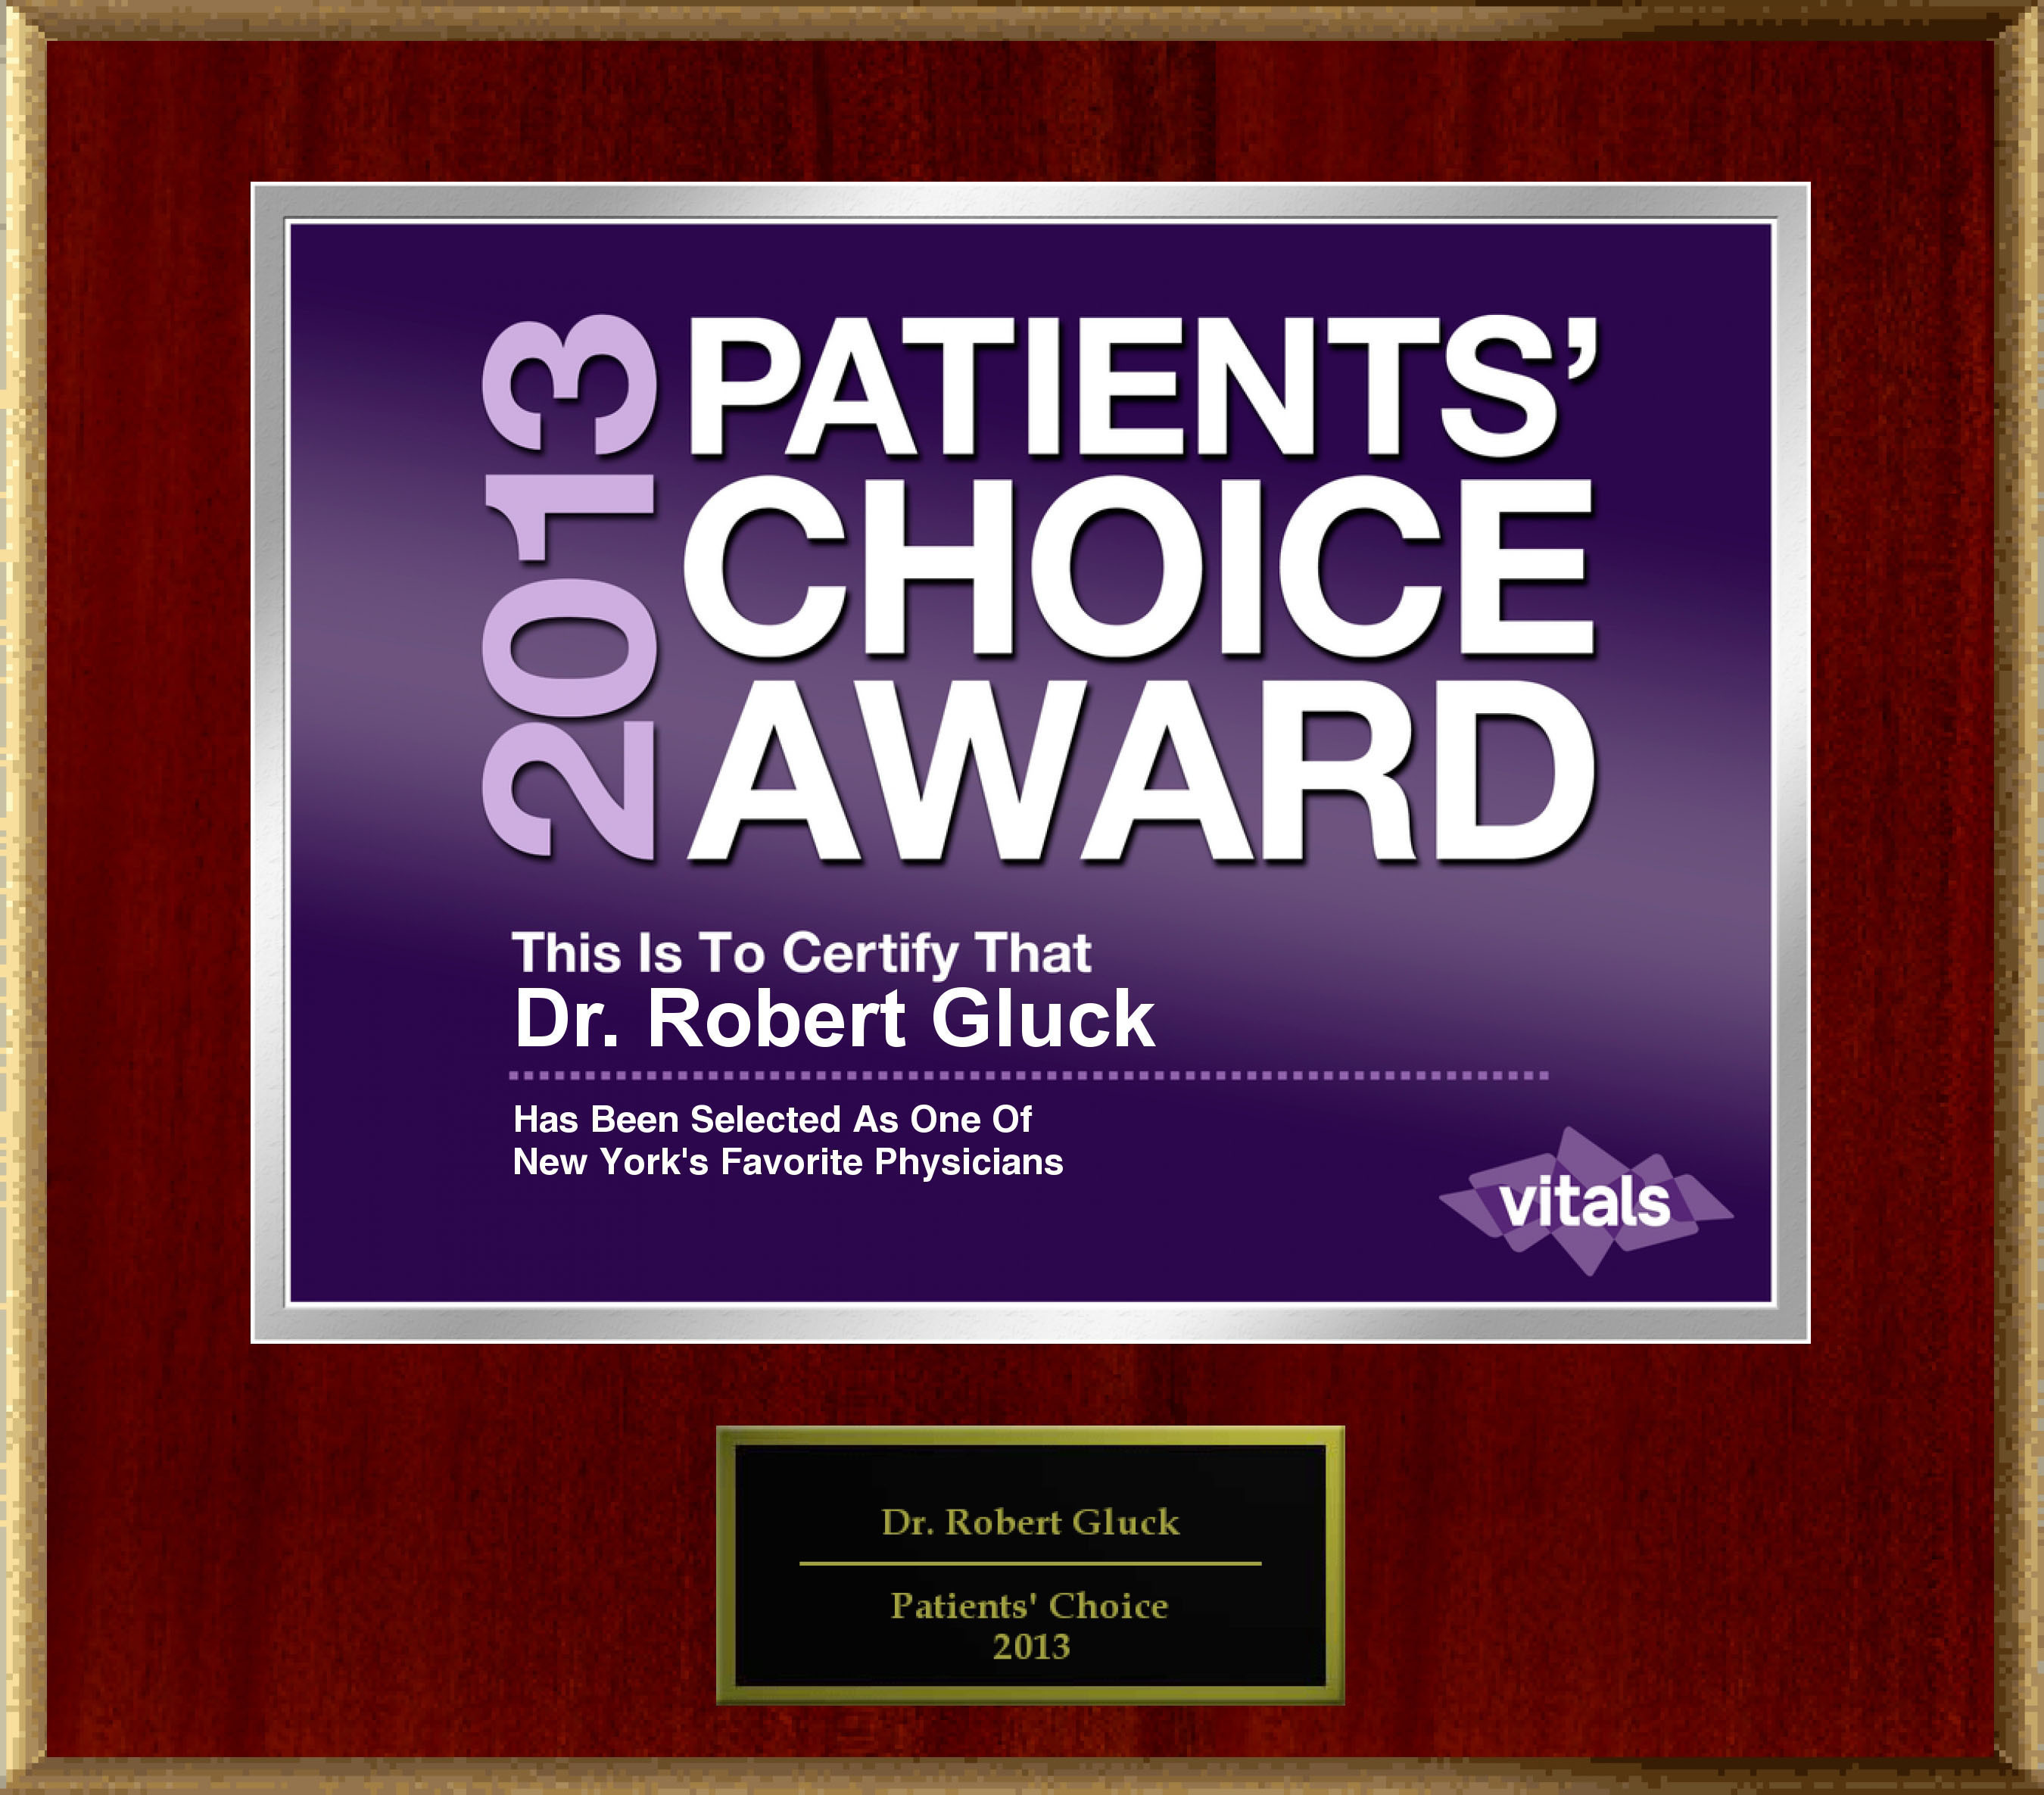 Dr. Robert Gluck of Lake Success, New York, NY Named a Patients' Choice Award Winner for 2013. (PRNewsFoto/American Registry) (PRNewsFoto/AMERICAN REGISTRY)